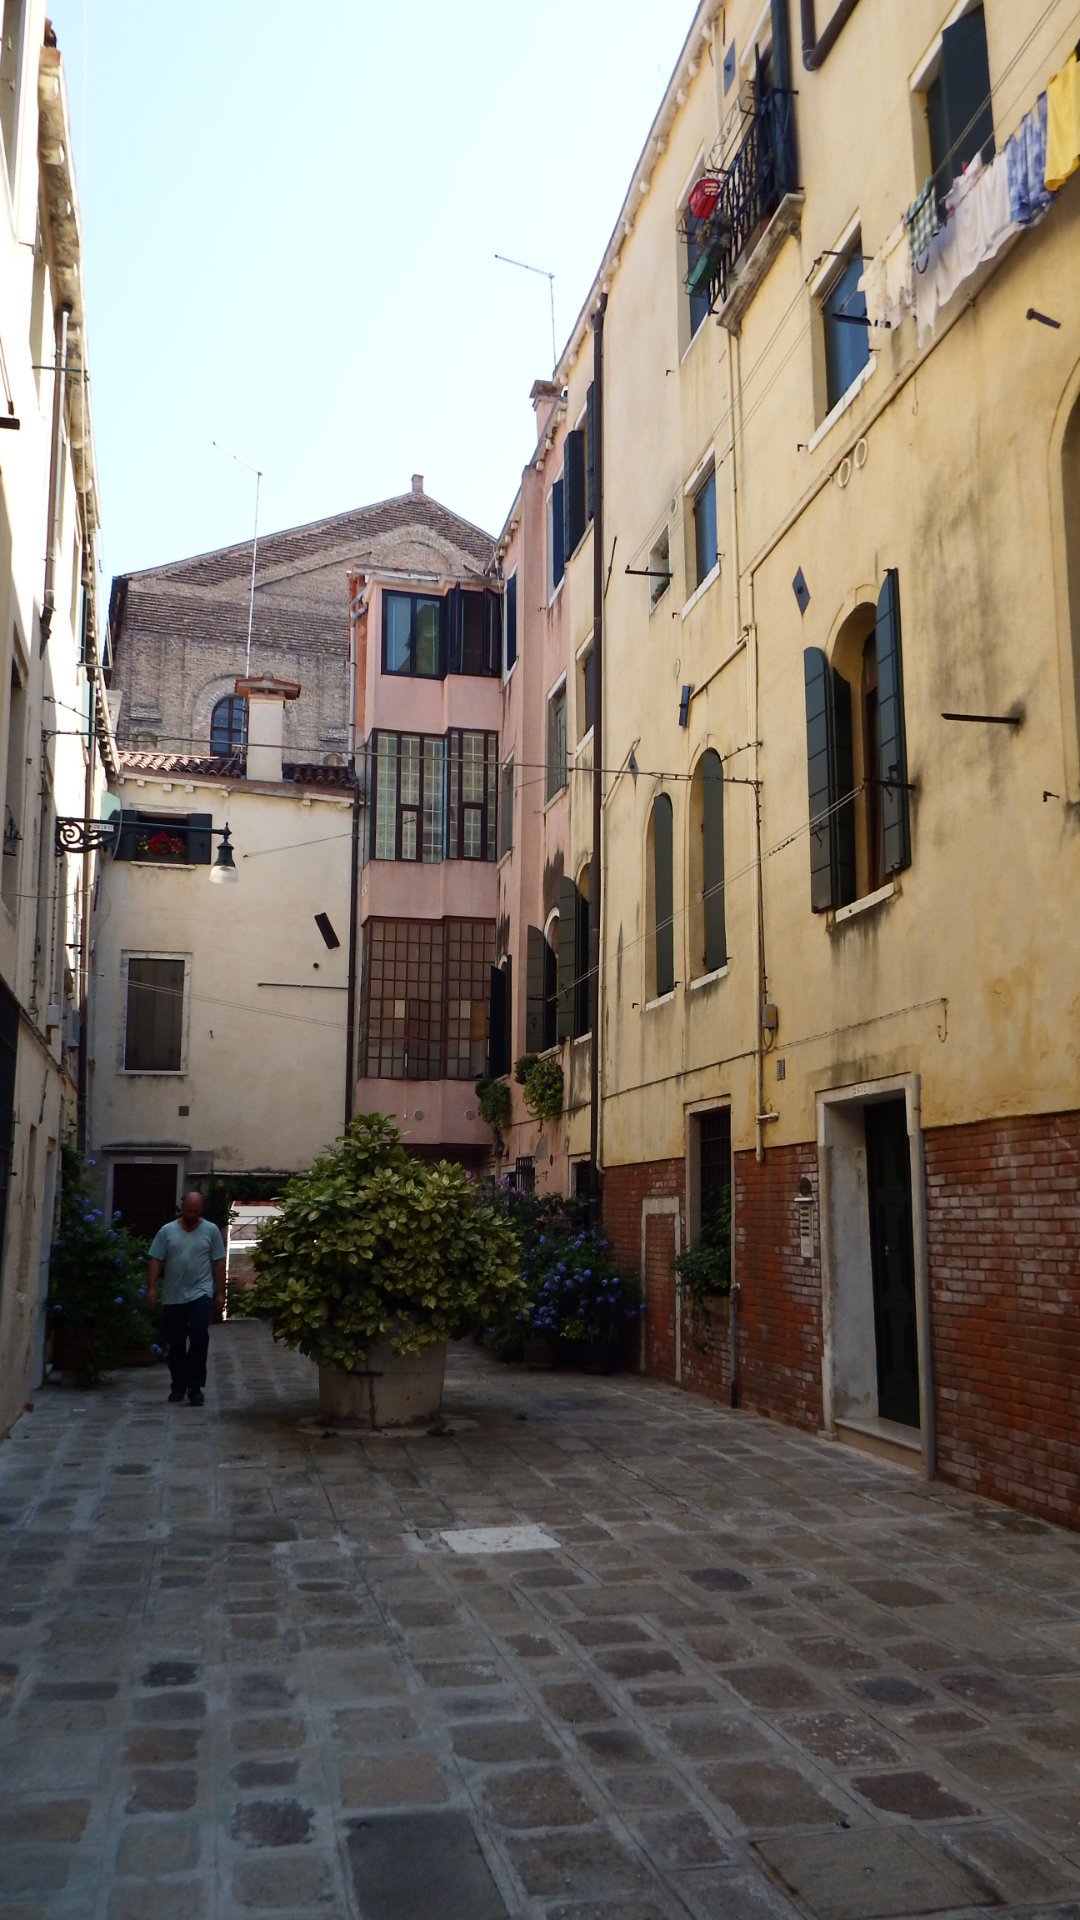 two people walk in the alley between some buildings